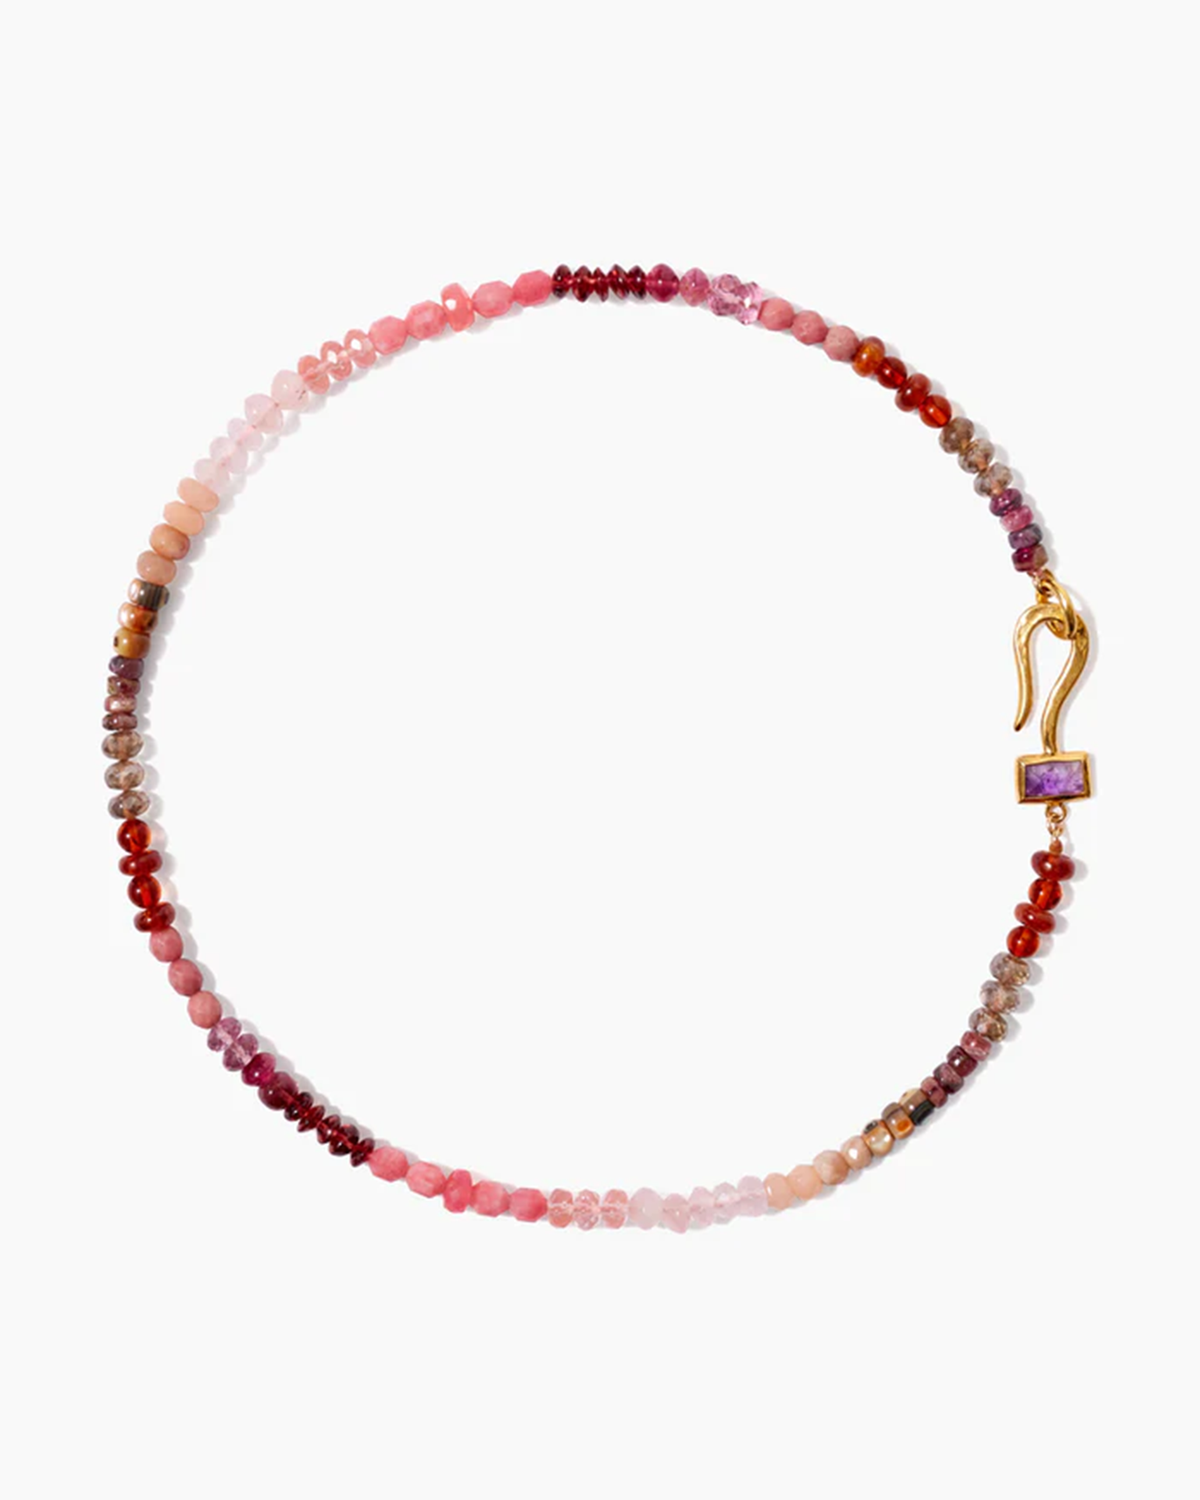 Chan Luu Jewelry Pink Mix/Gold Odyssey Necklace in Pink Mix w/ Gold